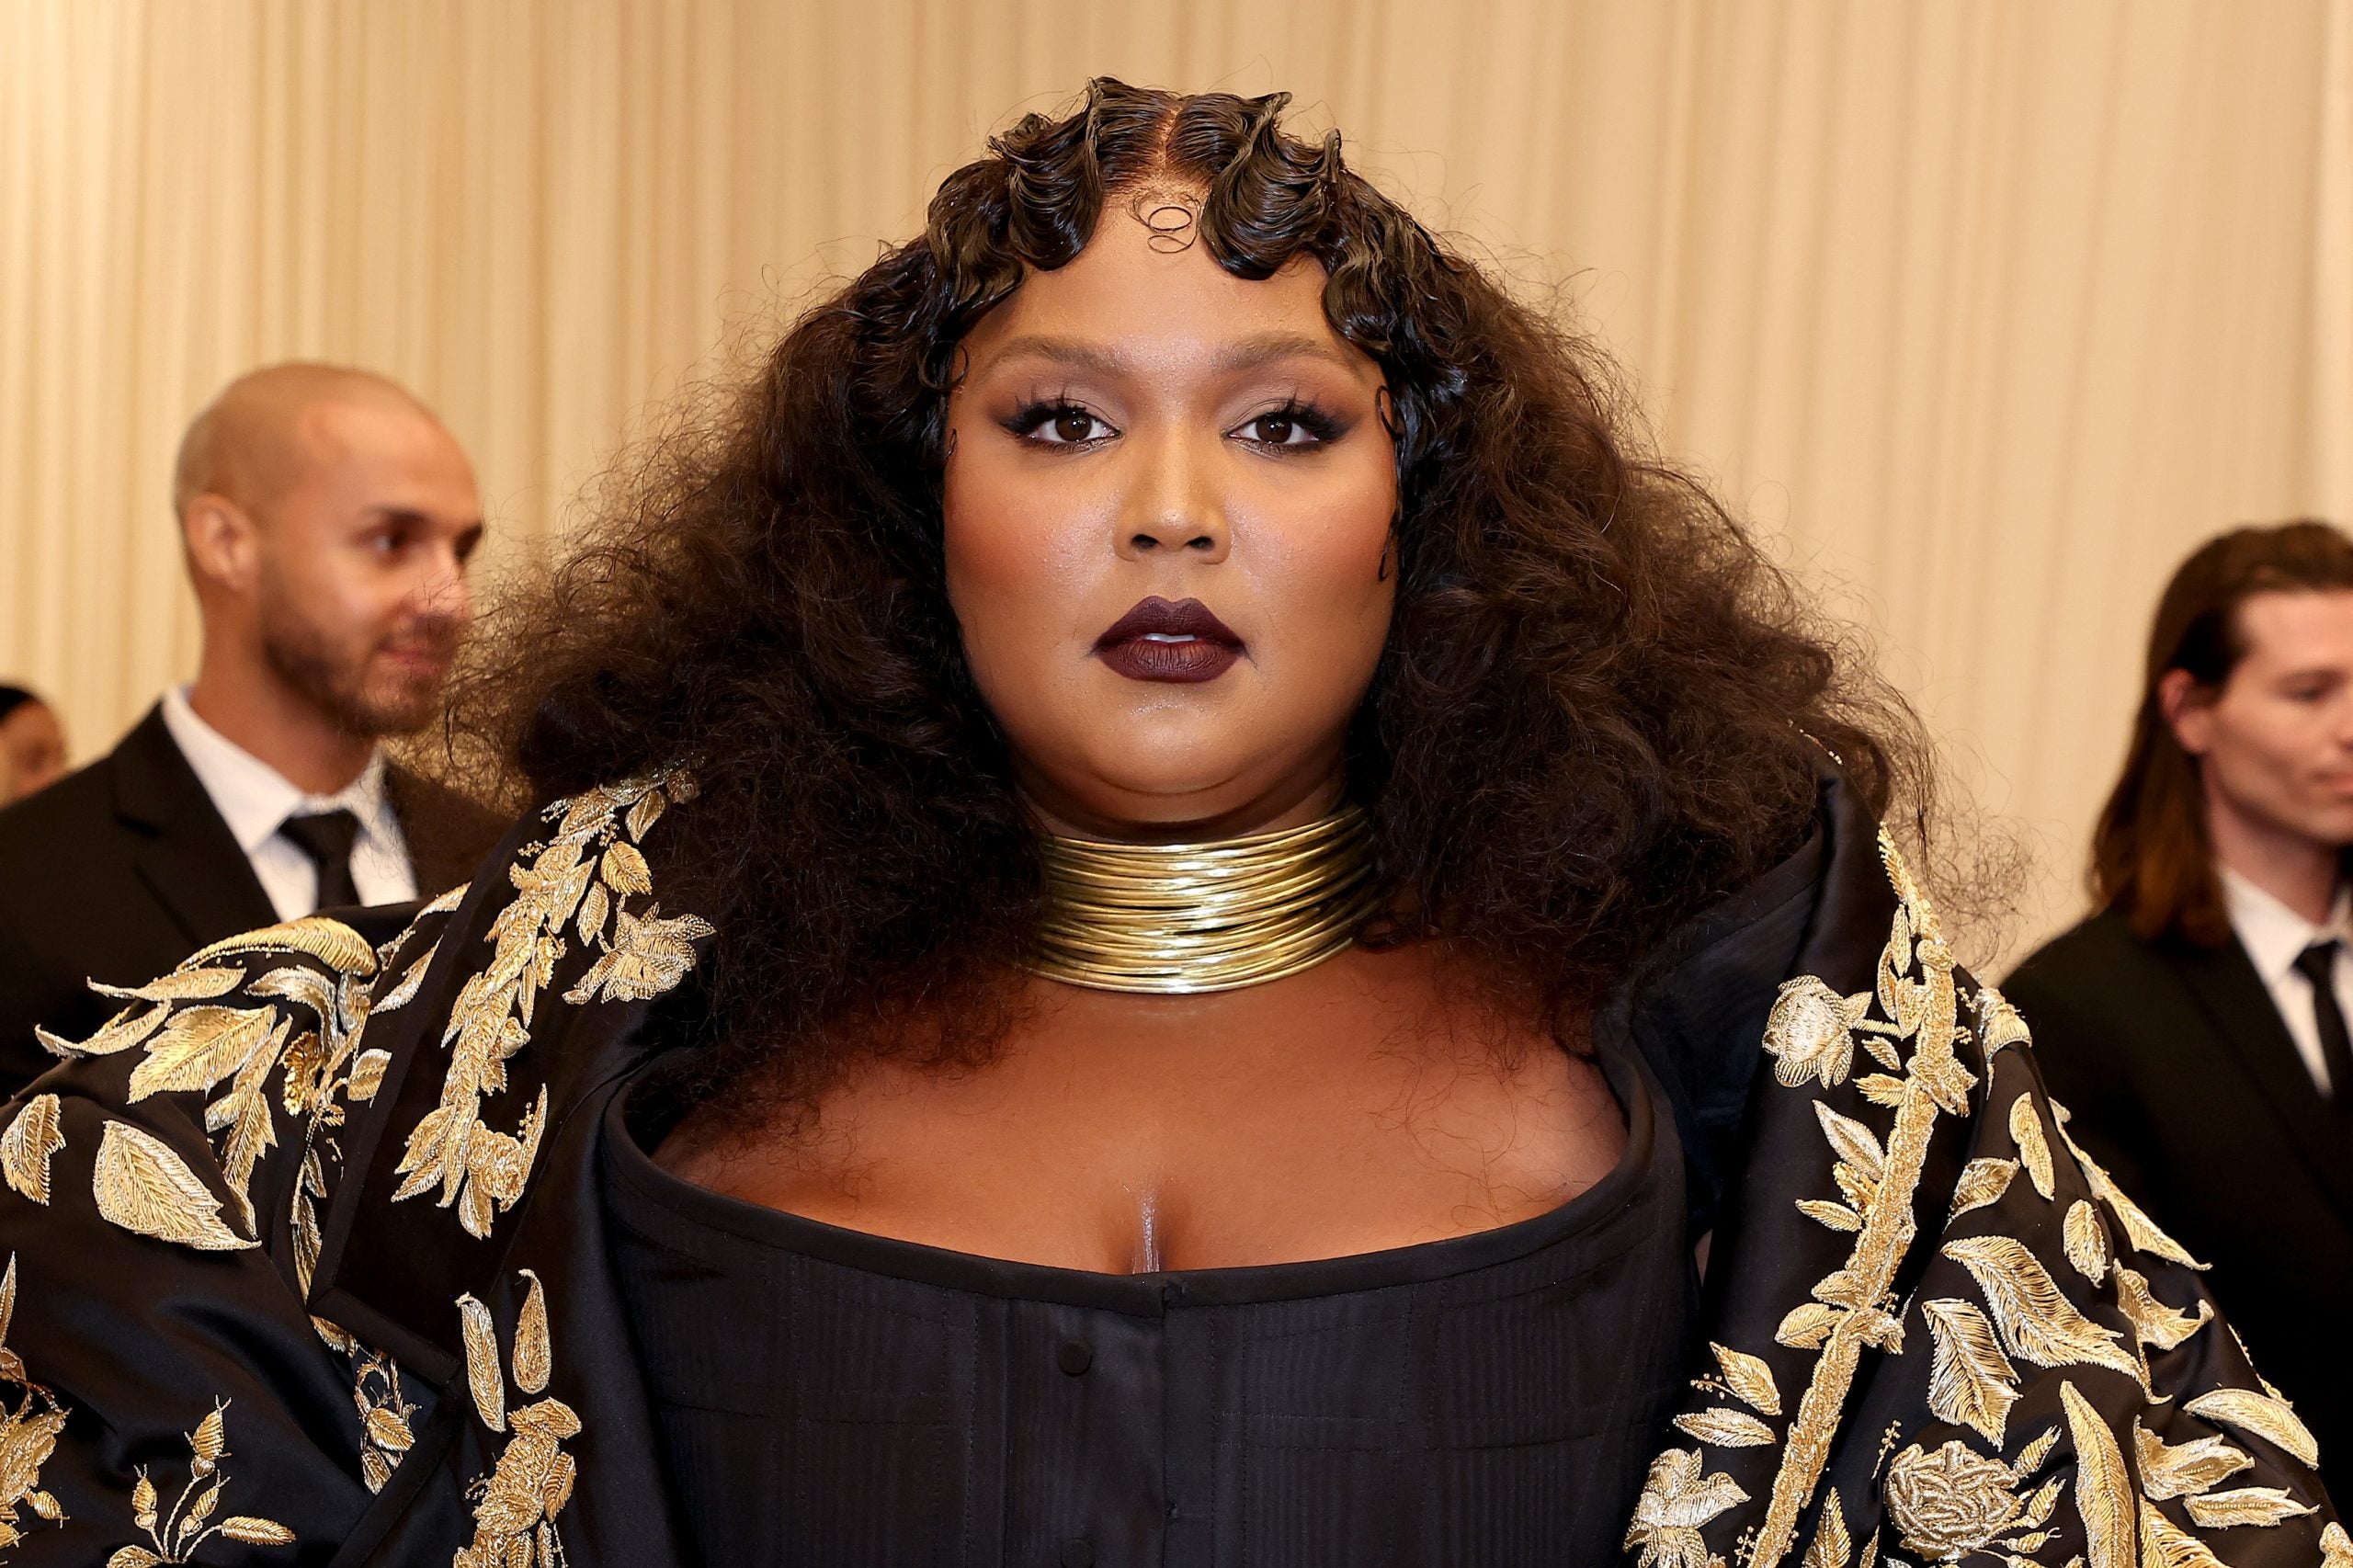 Lizzo Changes Lyric From The Single “GRRRLS” After Backlash On Social Media For Using Ableist Slur